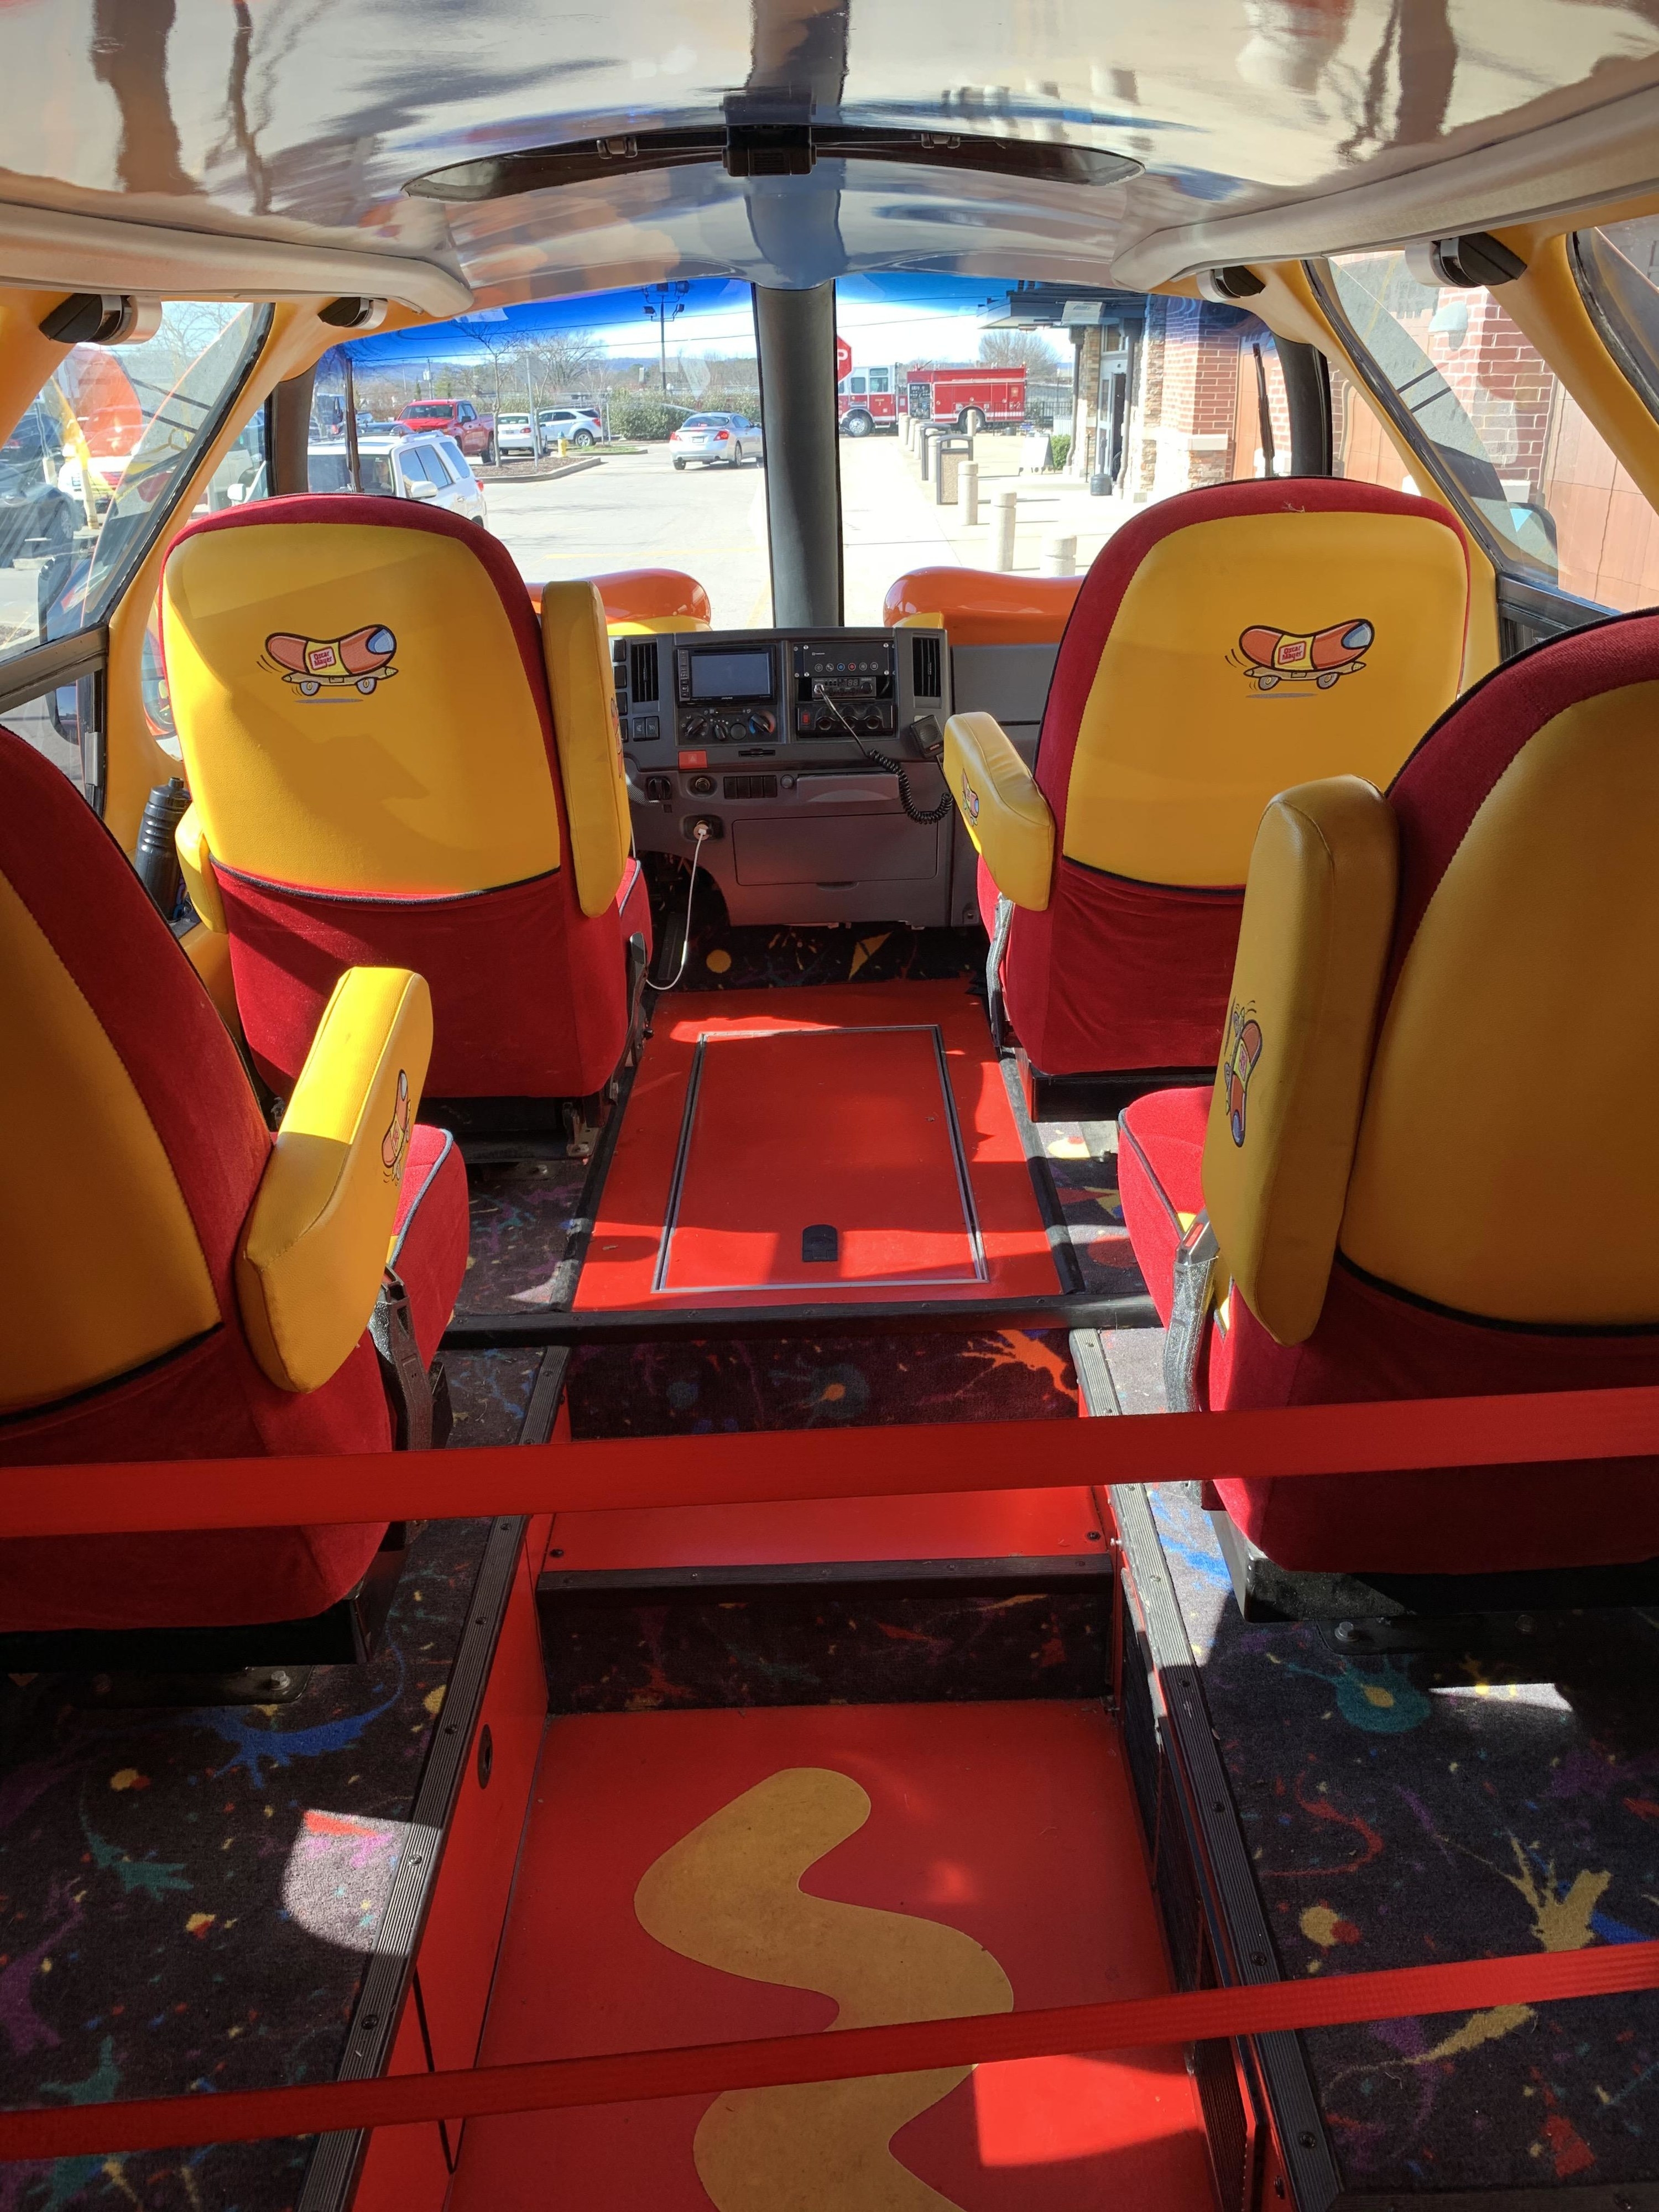 Brightly colored (red and yellow) seats with a yellow mustard zigzag on the floor and hot dogs illustrations on the backs of the seats